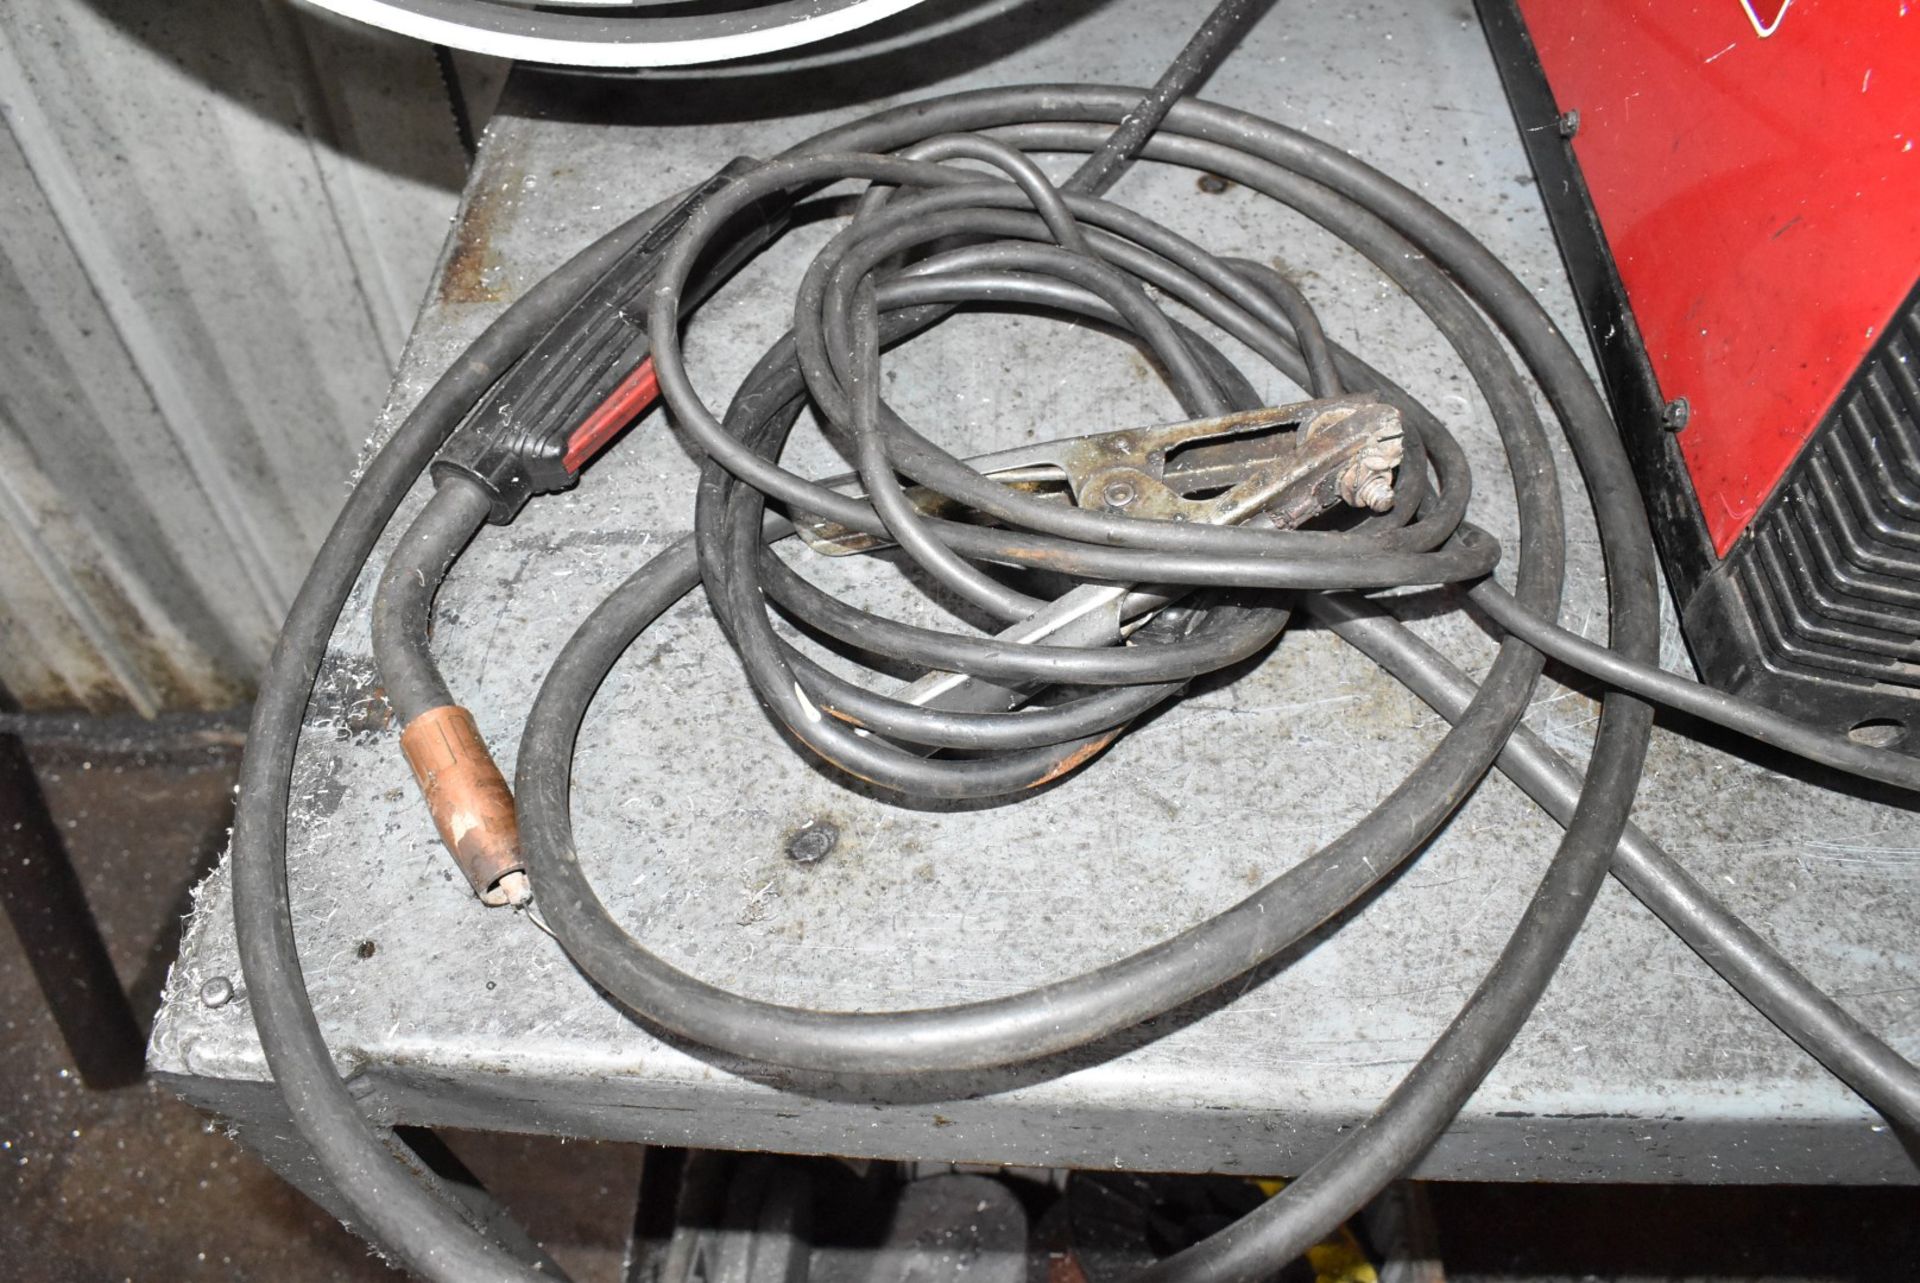 LINCOLN ELECTRIC MIG PAK 140 MIG WELDER WITH CABLES & GUN, S/N M3110402802 - Image 4 of 4